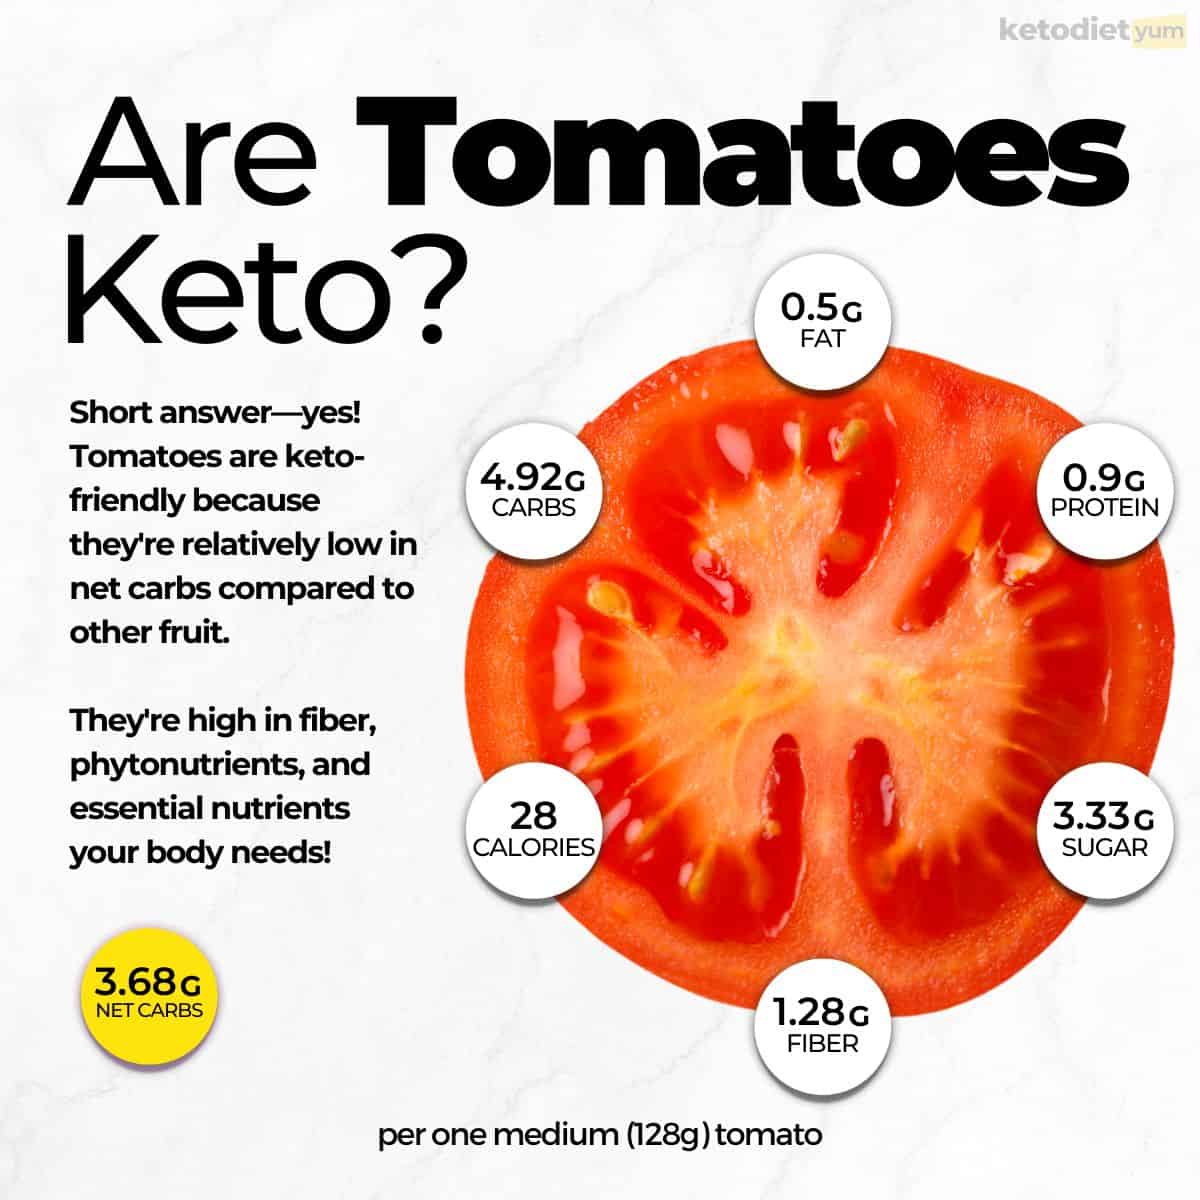 Are Tomatoes Keto